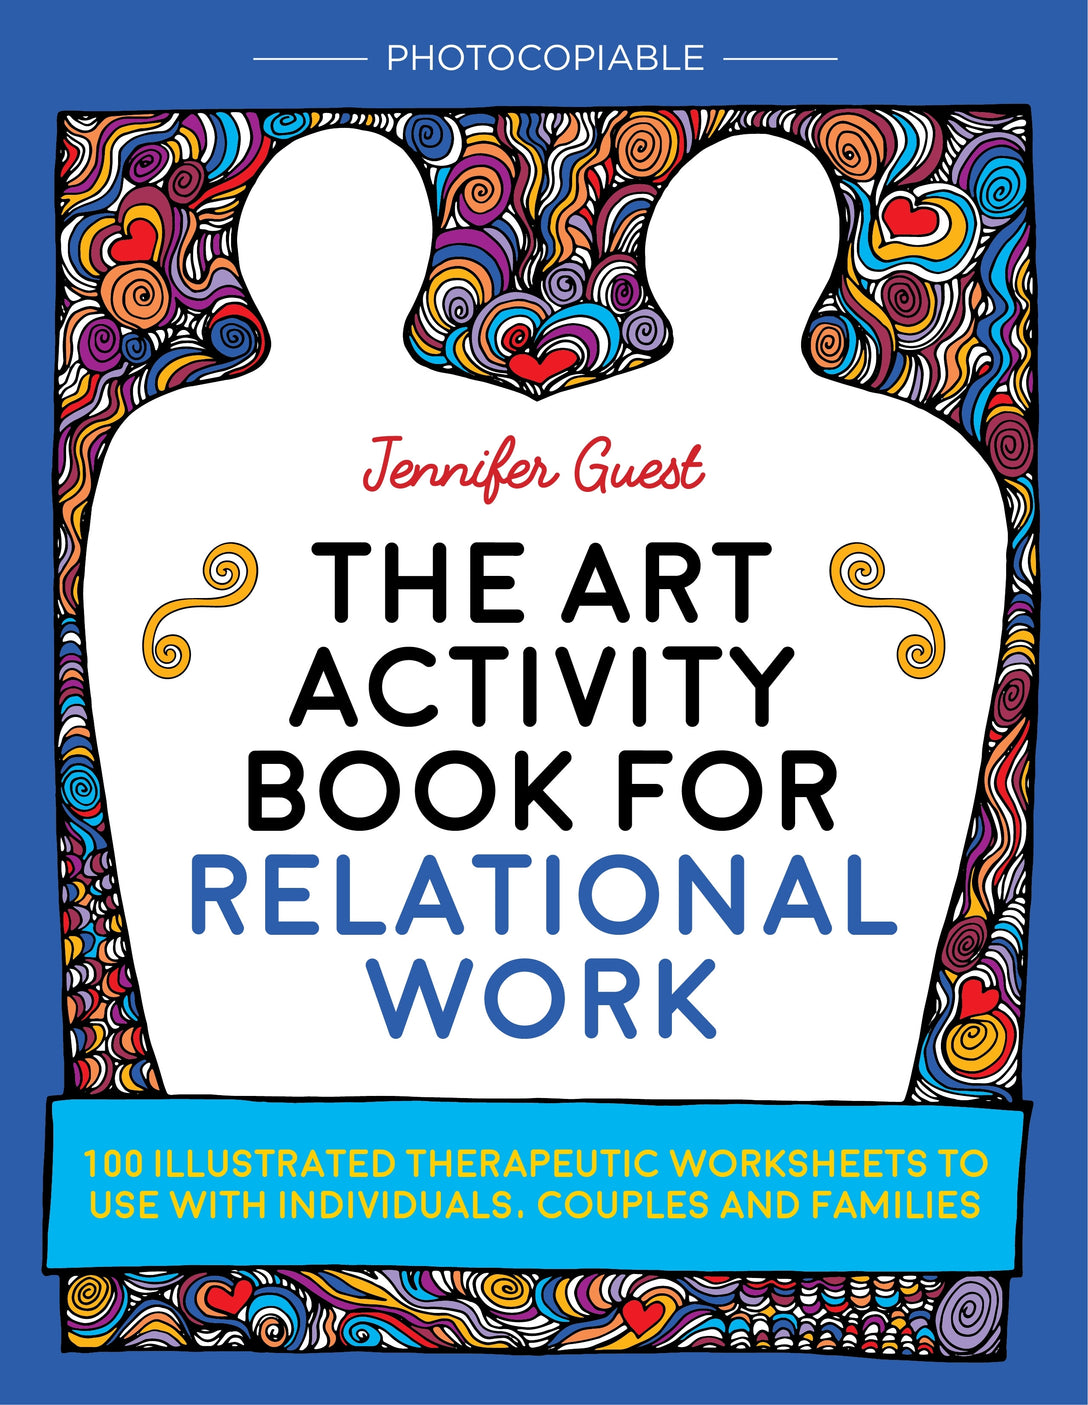 The Art Activity Book for Relational Work by Jennifer Guest